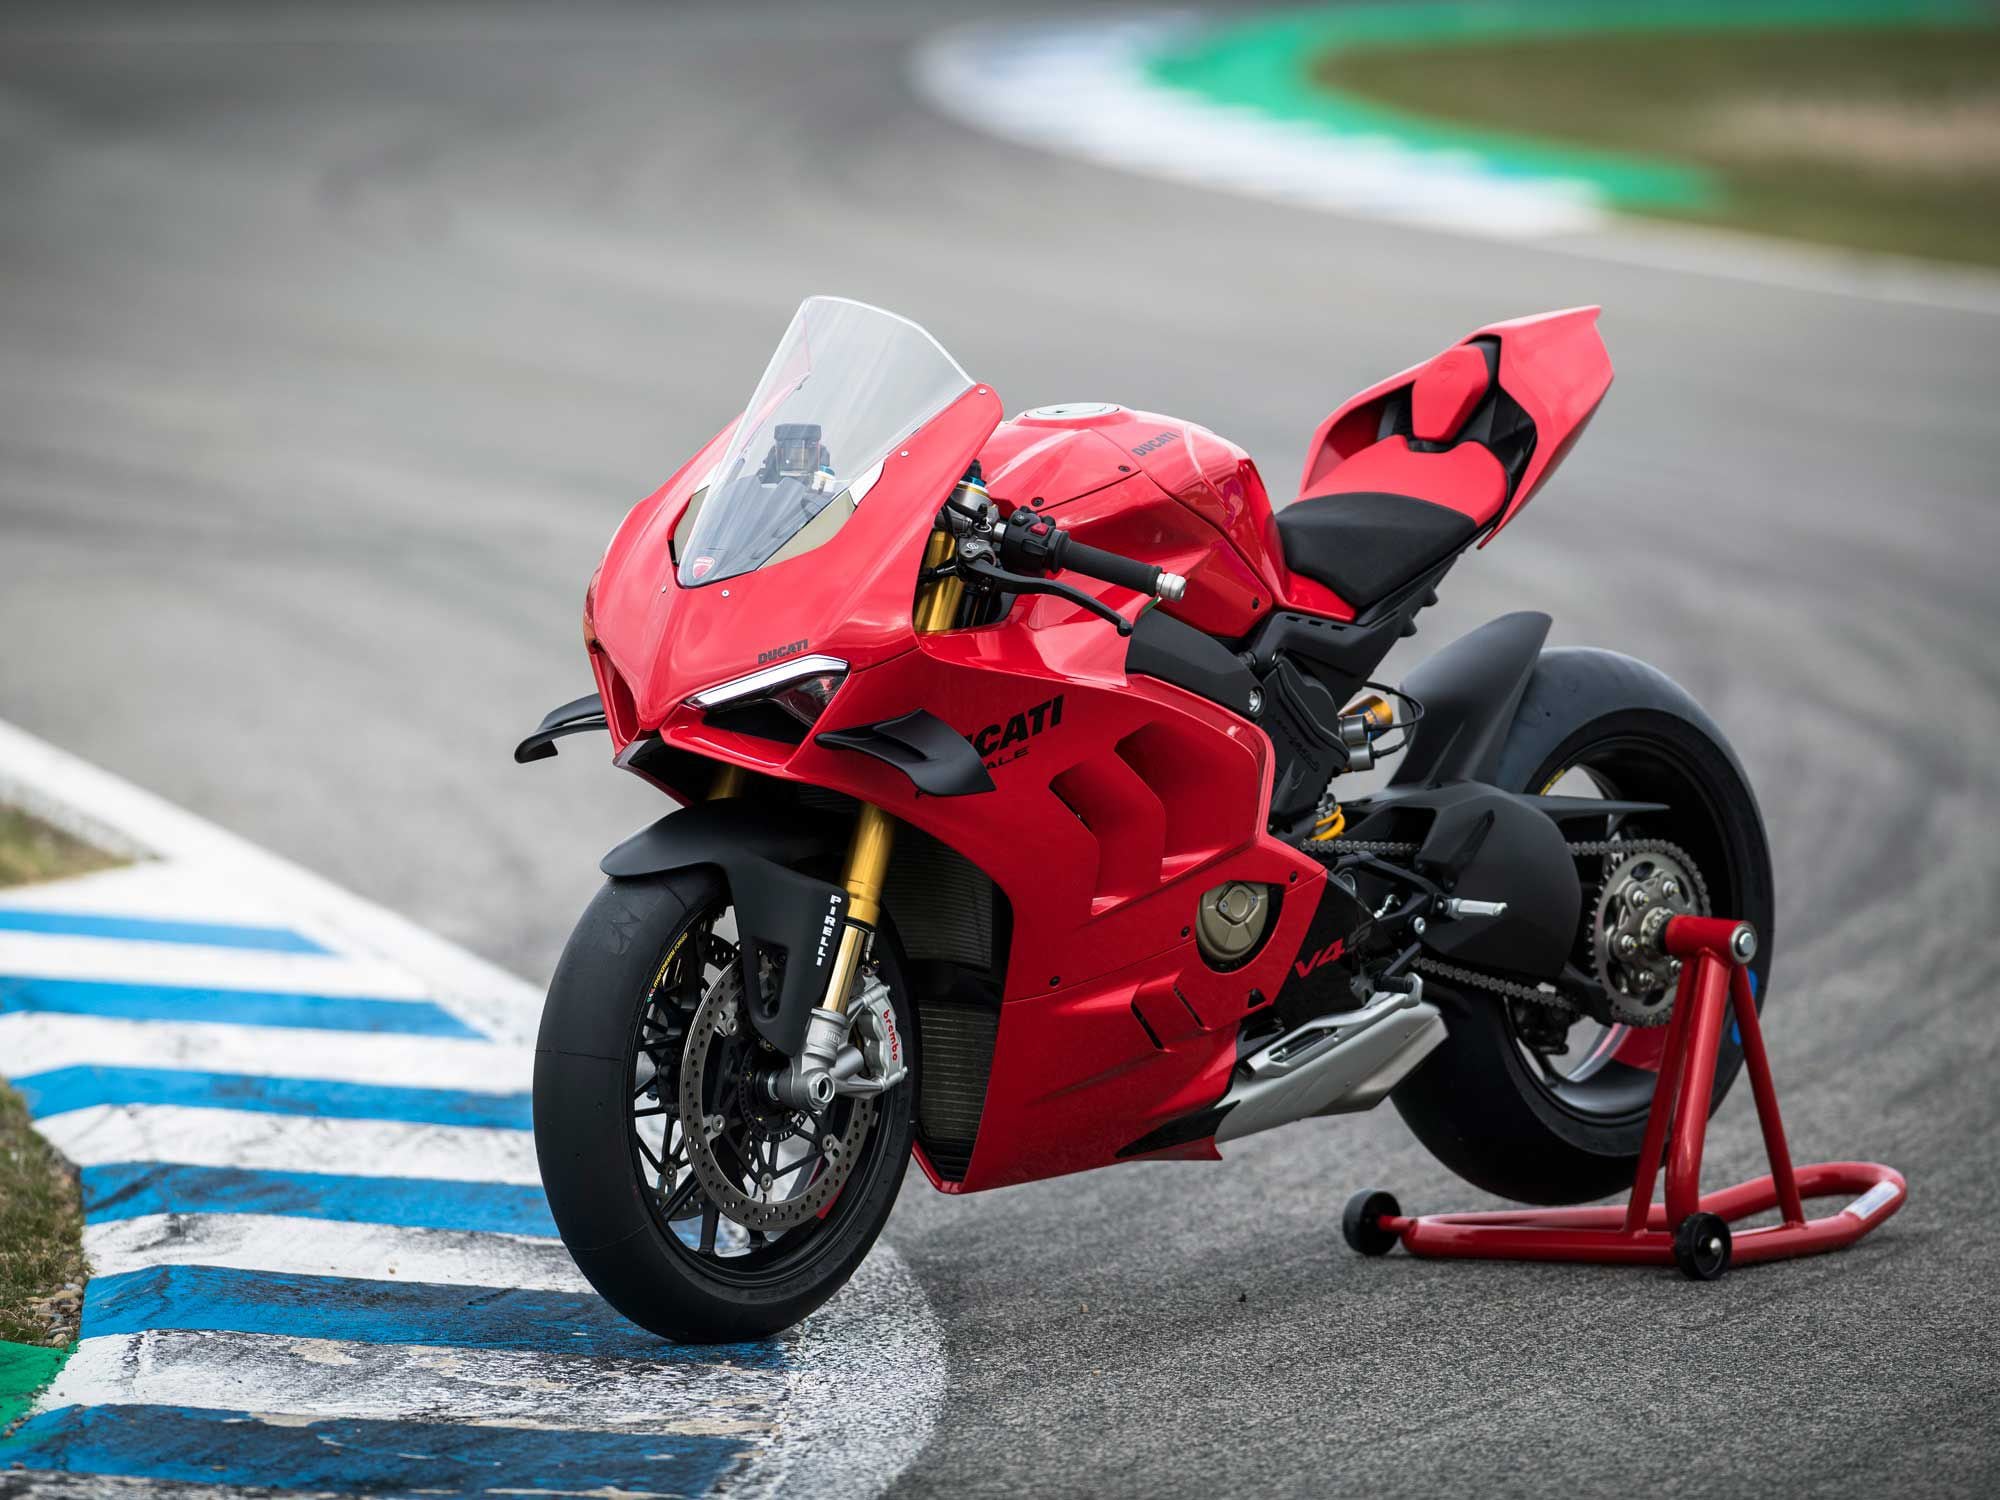 The 2022 Ducati Panigale V4 S Superbike rings in at $29,995 and carries a two-year warranty.